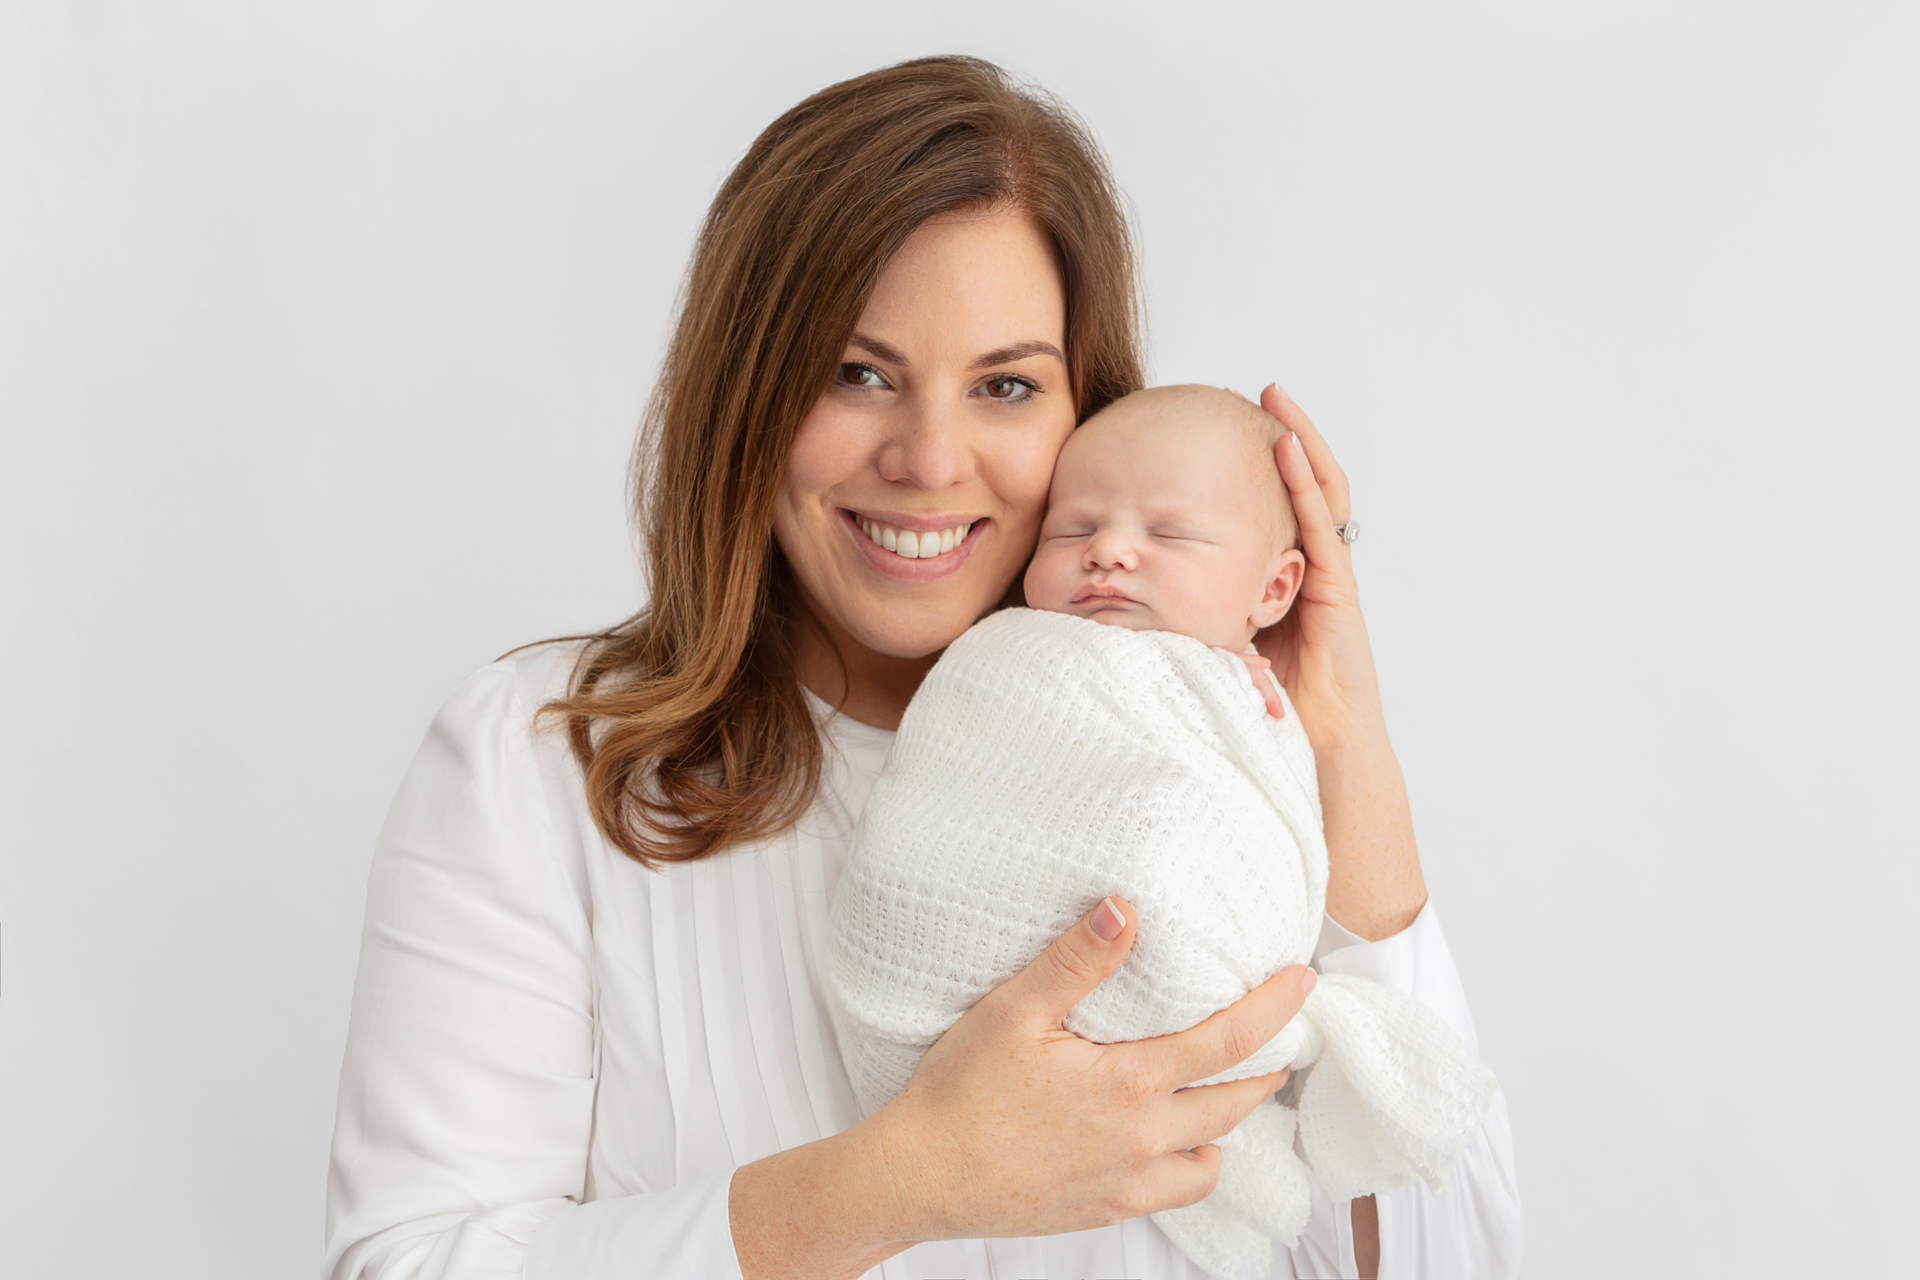 smiling Irish mom holding her newborn son against her cheek; mother and baby are in white